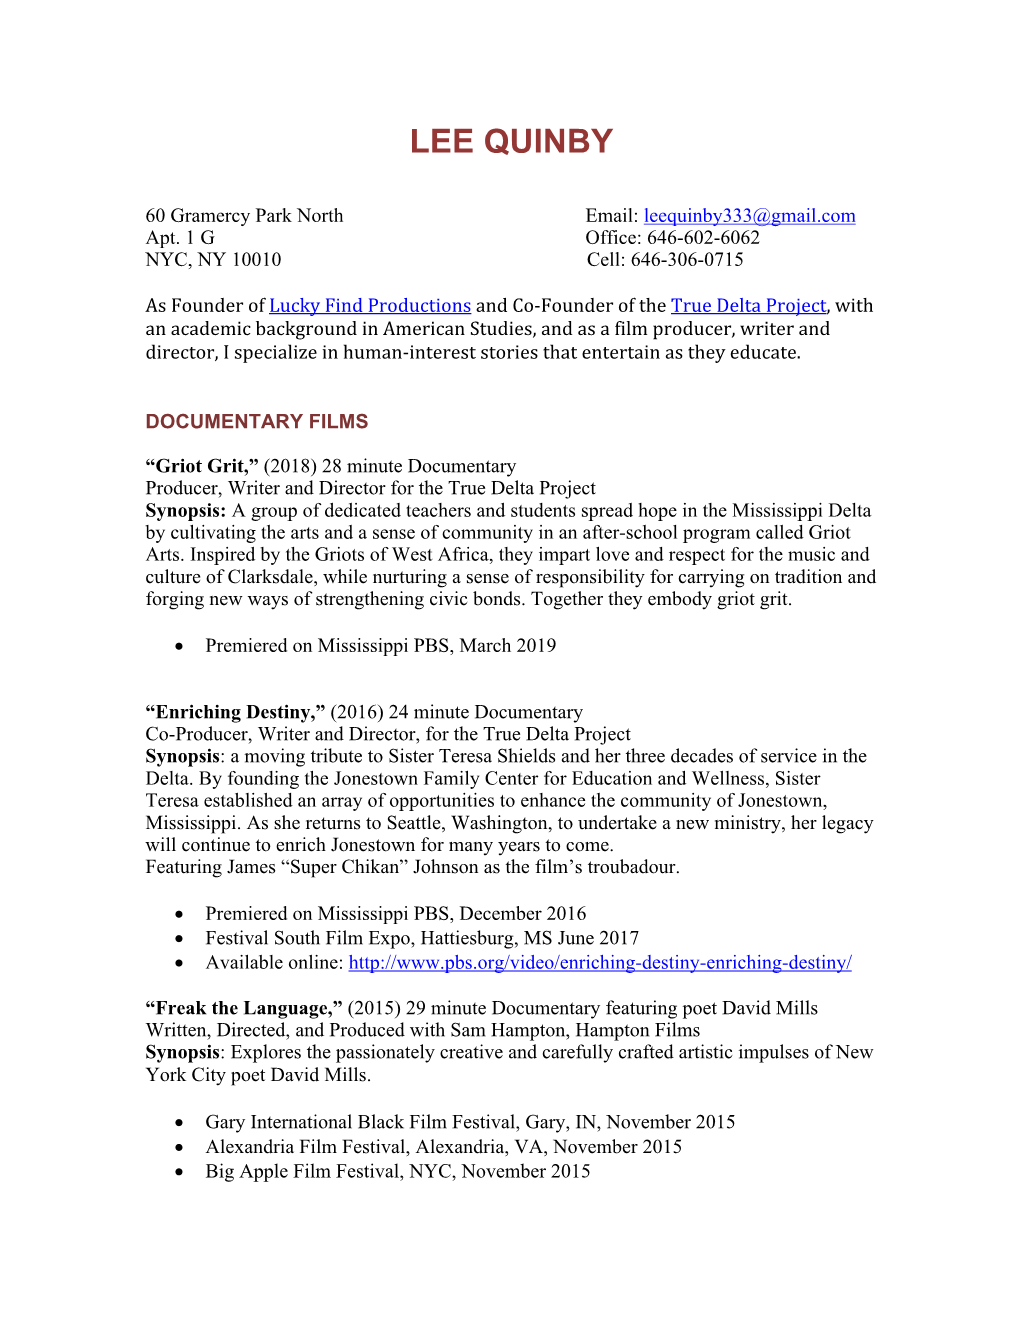 Resume for Lucky Find Productions-4-2